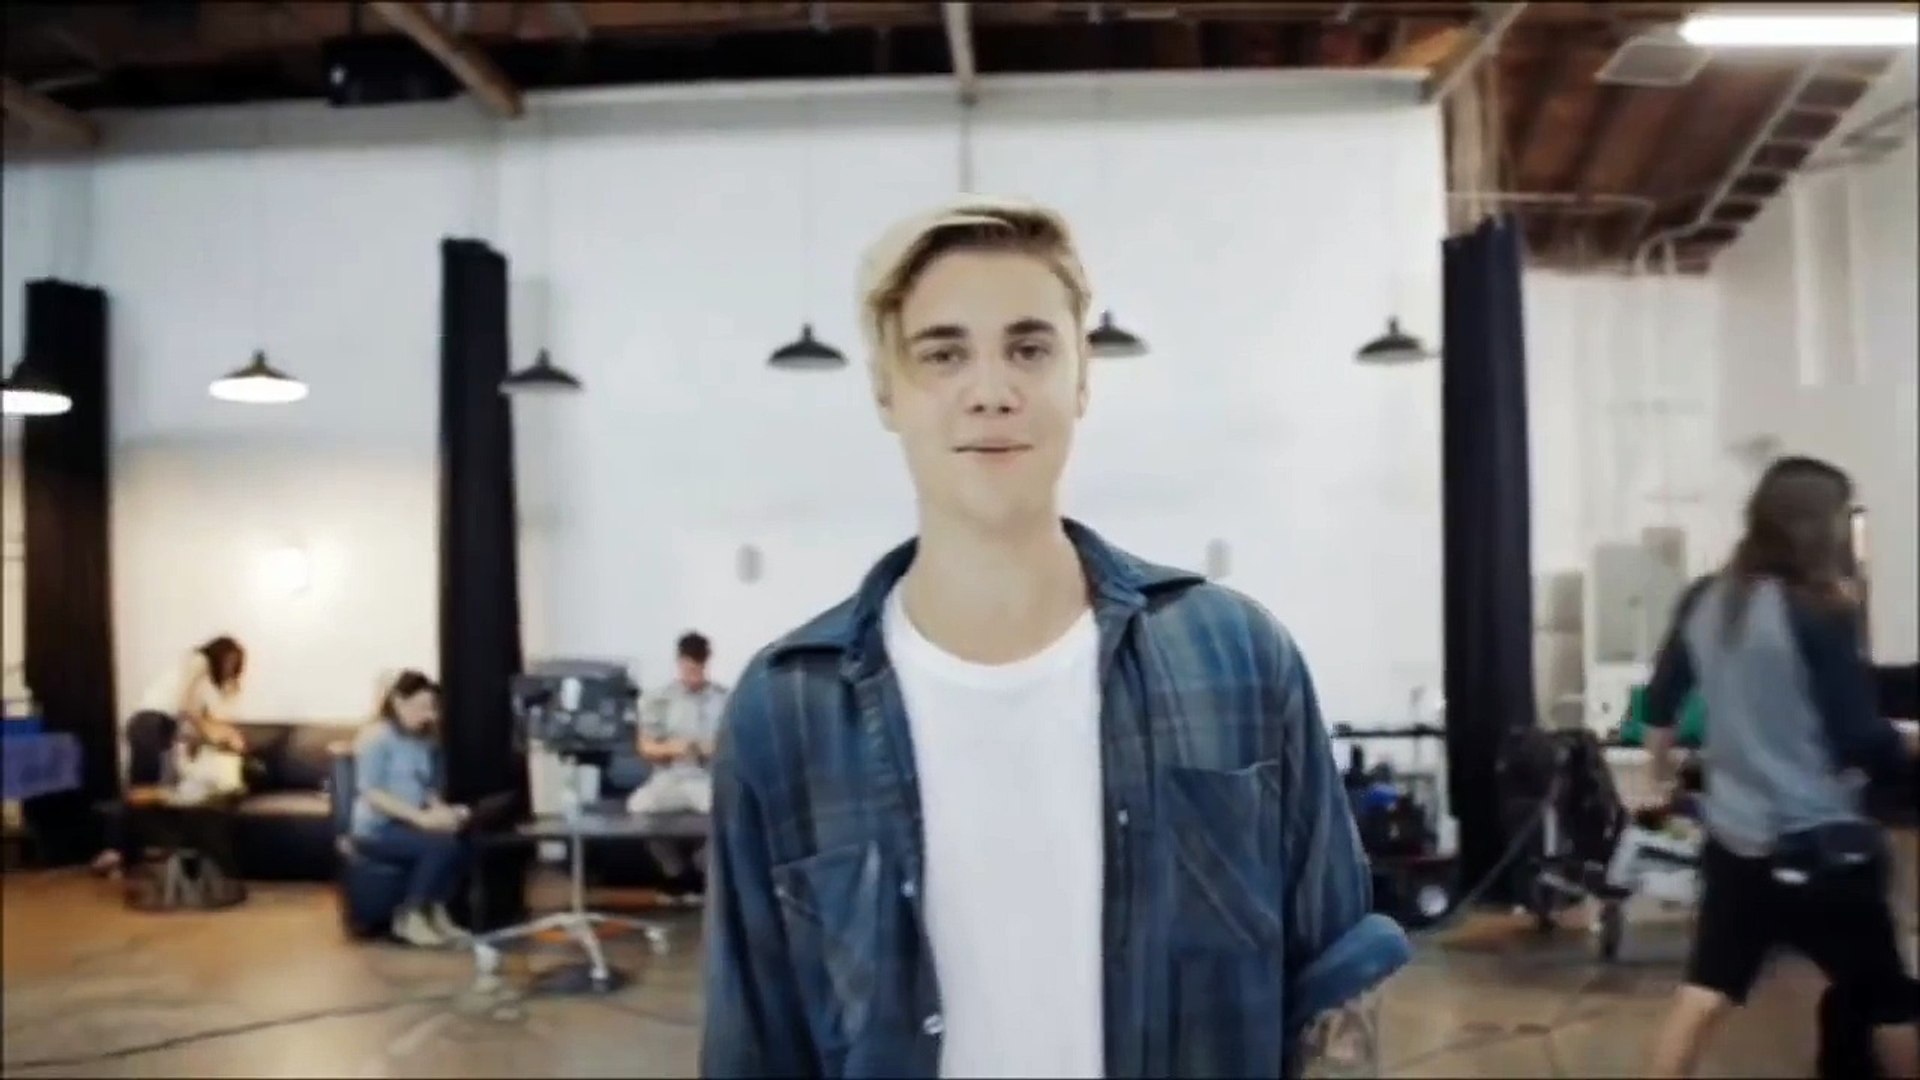 Justin Bieber gives his new music video an artistic edge with Skrillex and  Diplo in behind-the-scenes clip - Mirror Online